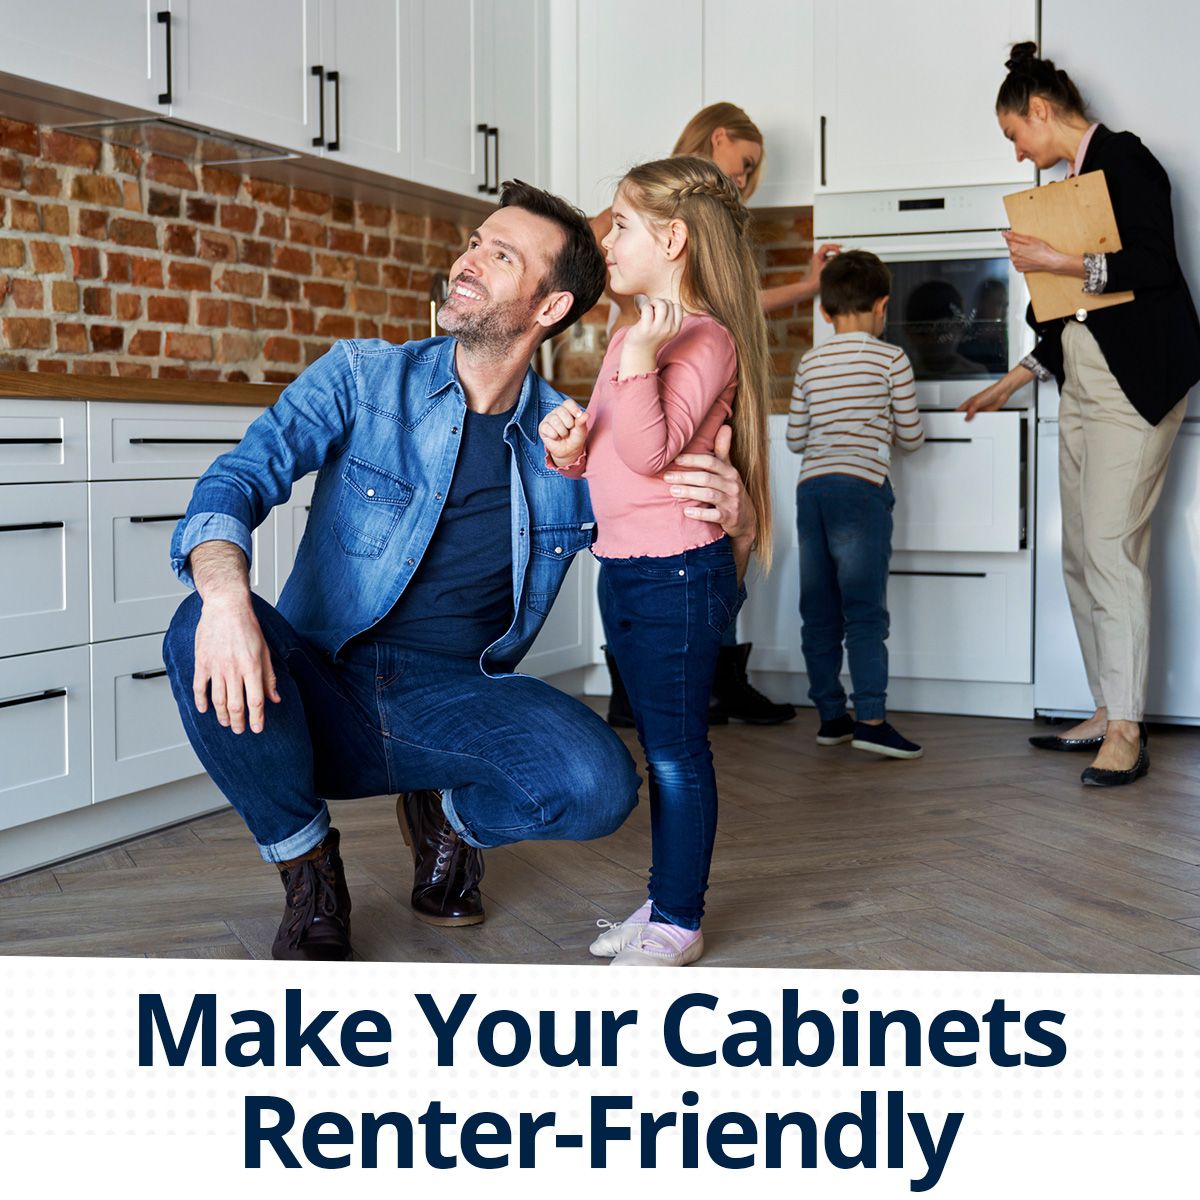 Make Your Cabinets Renter-Friendly